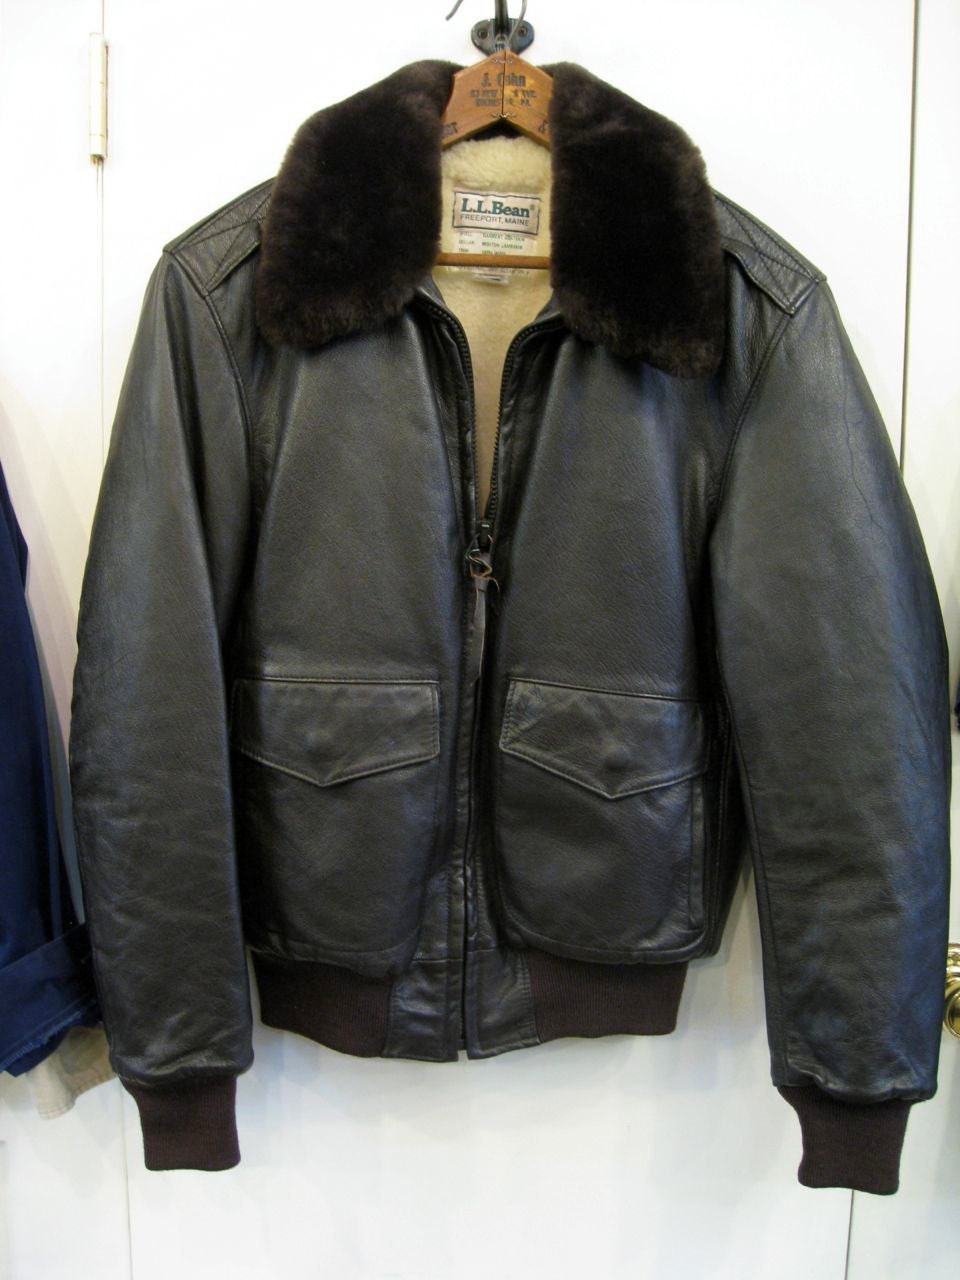 Deadstock 1970's LL Bean Leather Bomber Jacket with by sidvintage